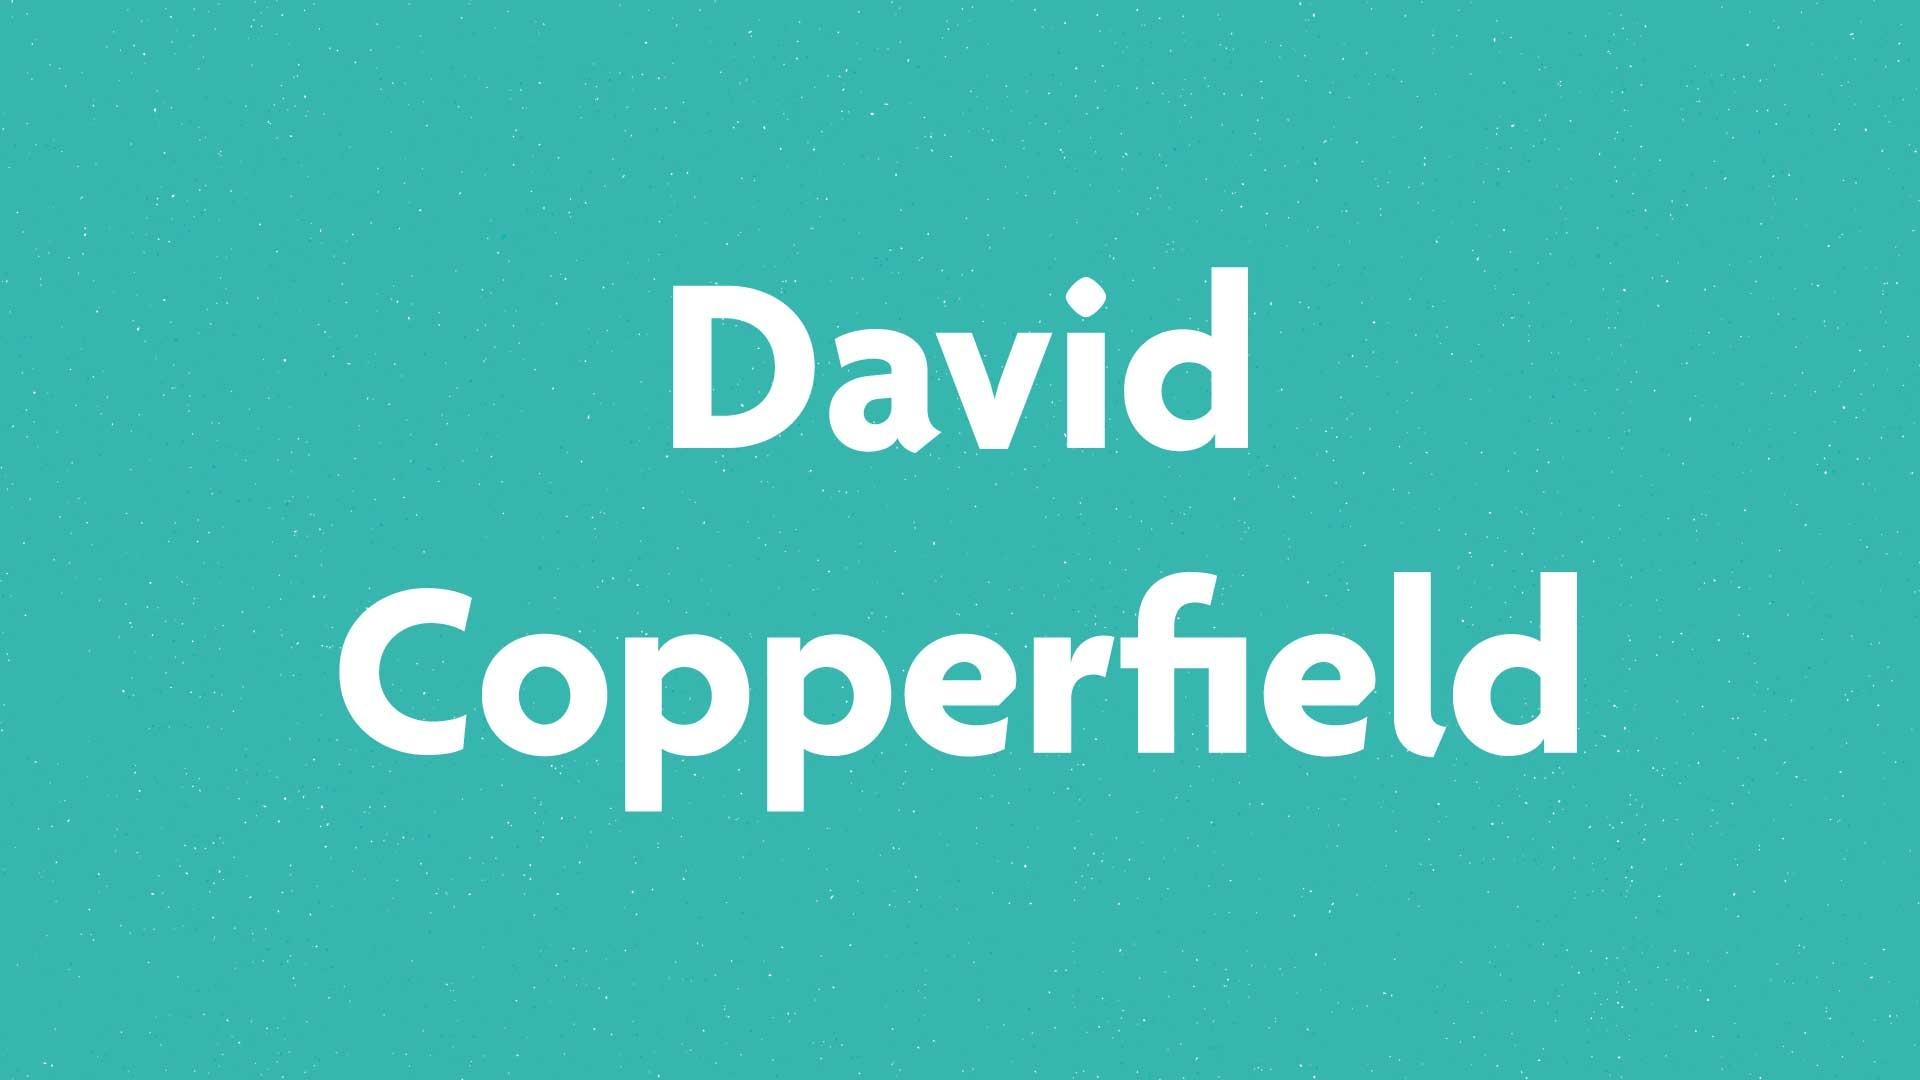 David Copperfield book submission card on a green background.